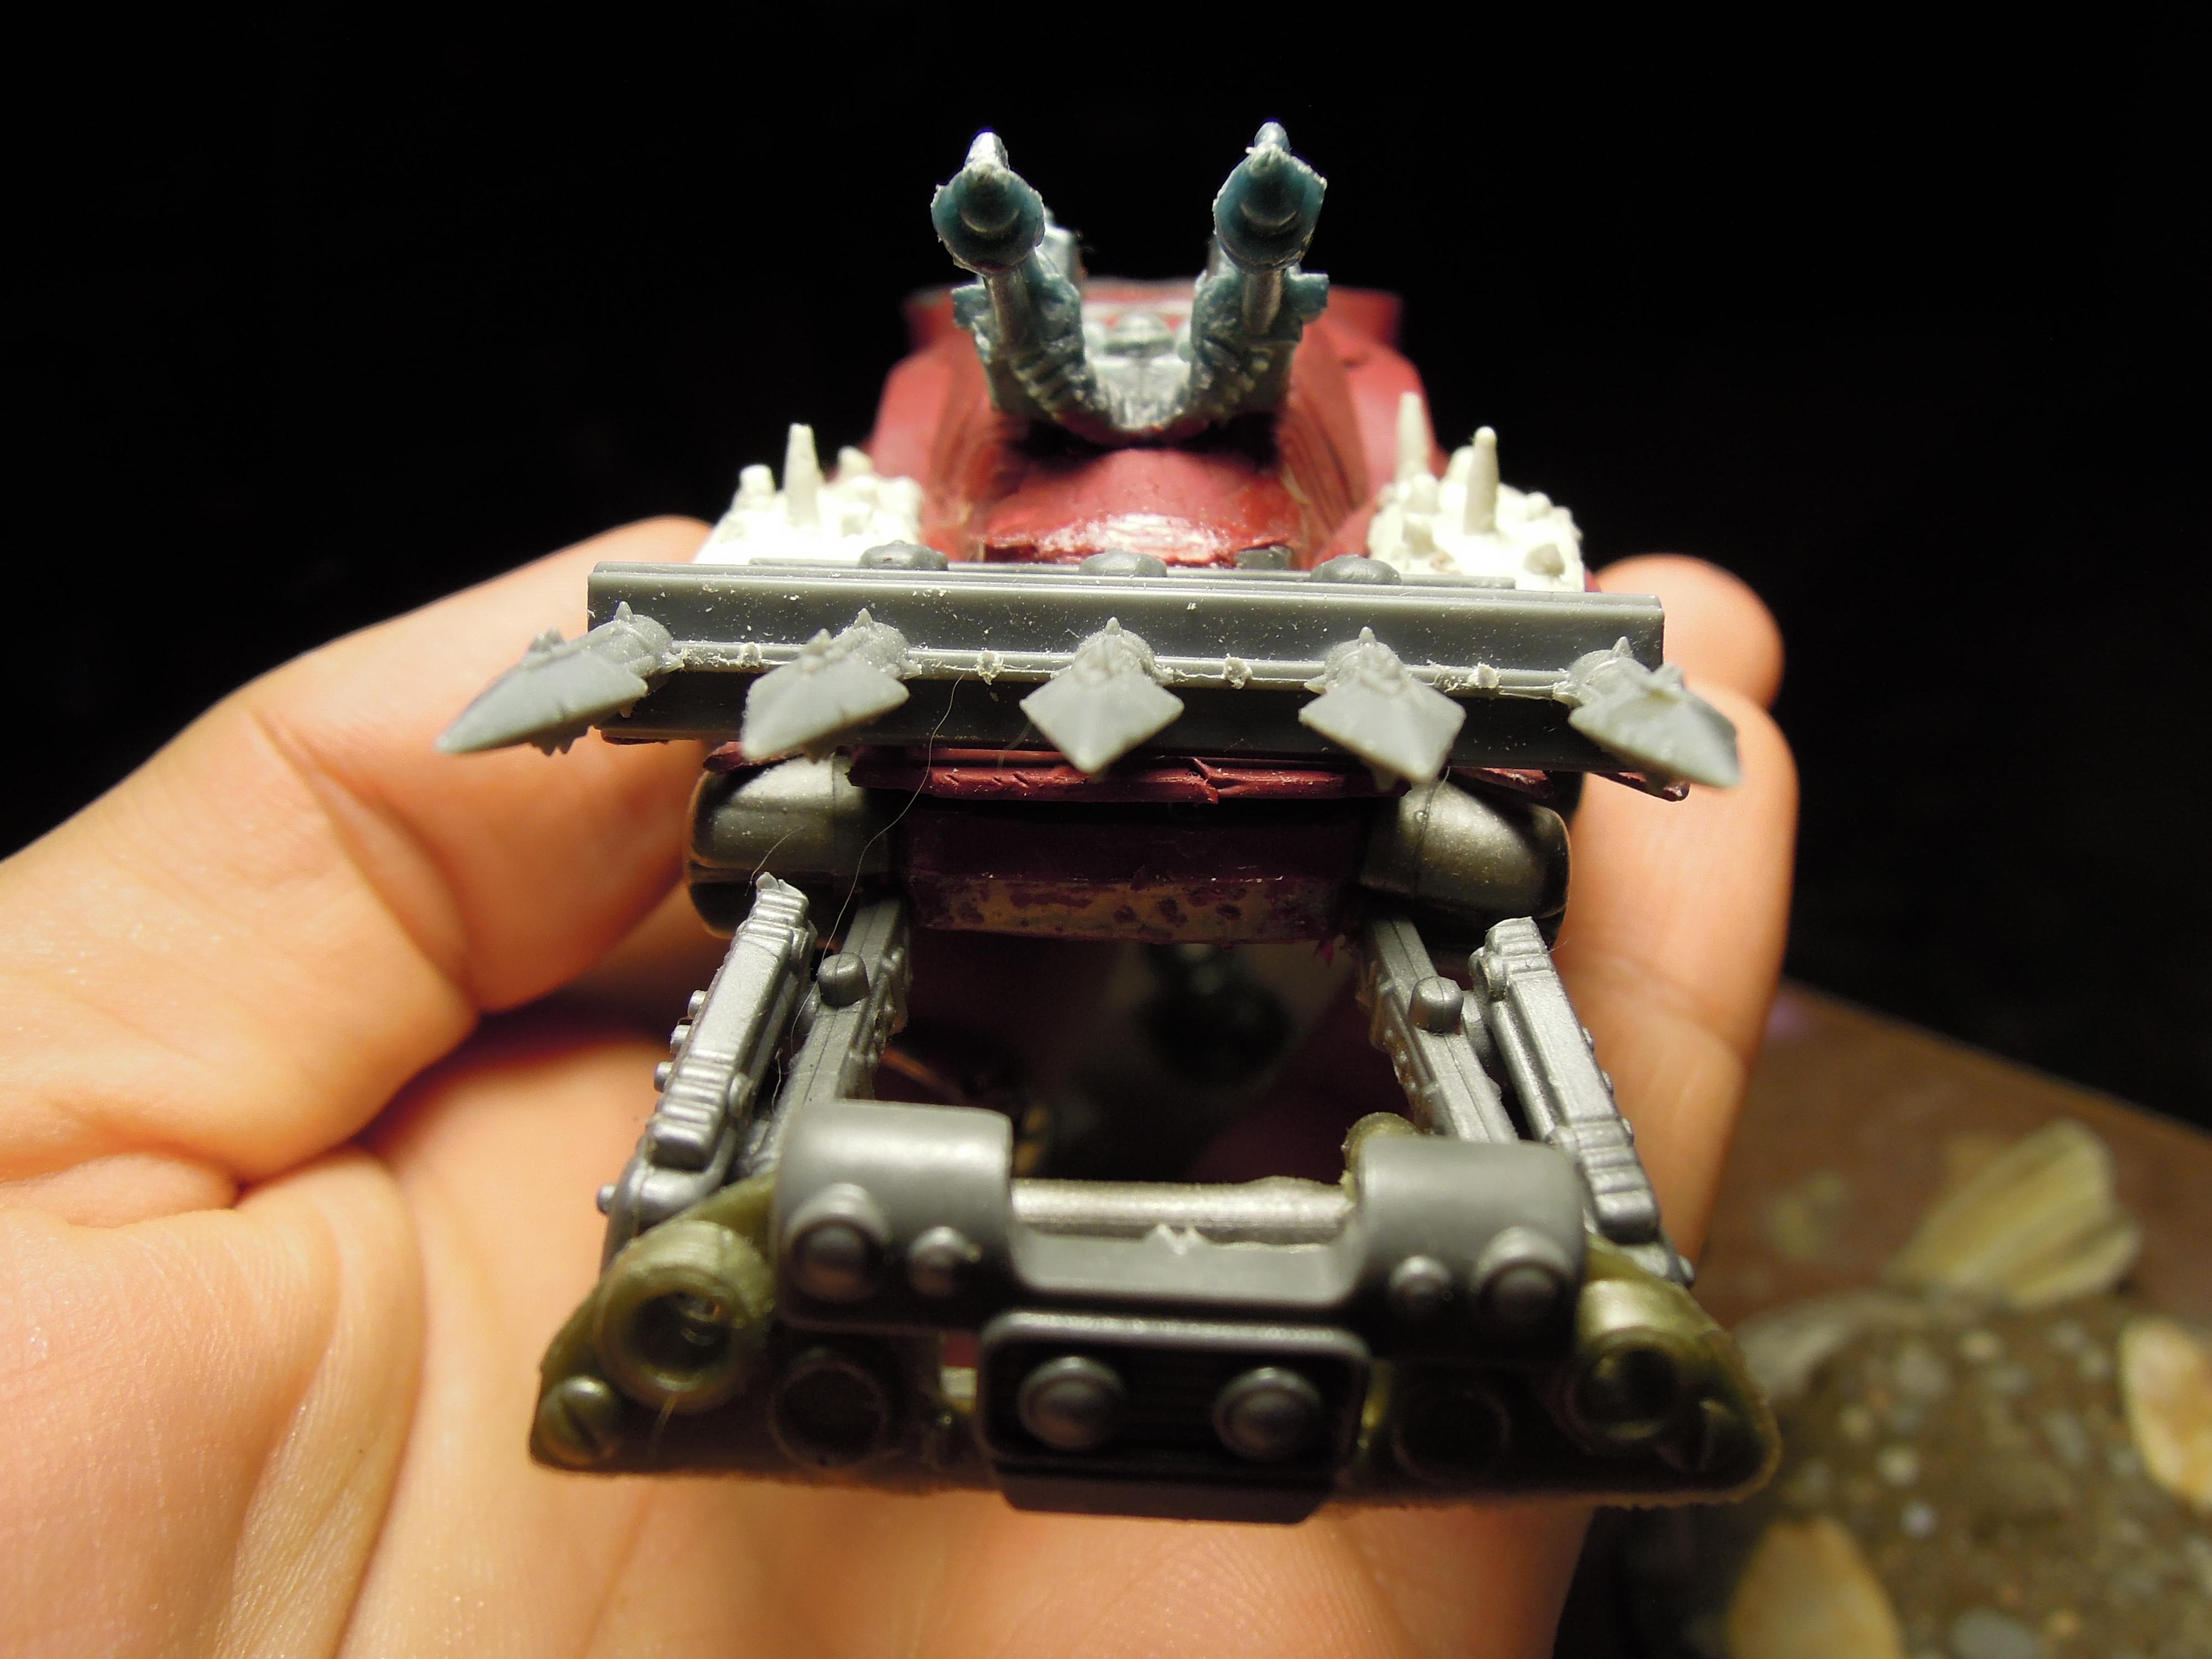 Armored Vehicle, Blood Pact, Chaos, Conversion, Daemon Engine, Dozer Blade, Heavy Support, Heresy, Laser, Scratch Build, Tank, Technolog, Tehnolog, Warhammer 40,000, Work In Progress